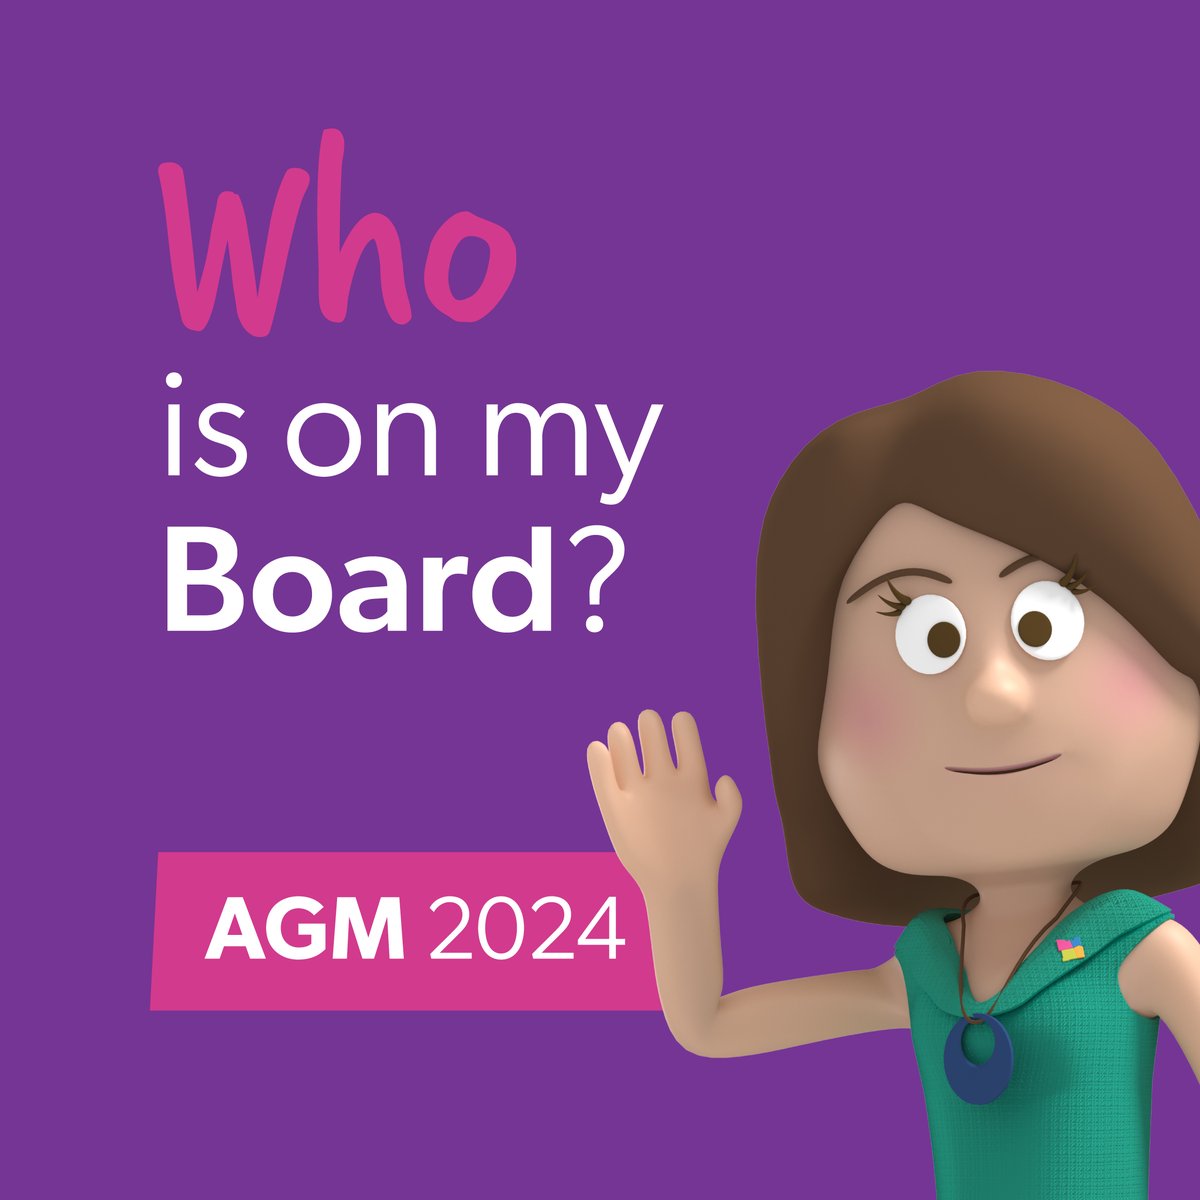 Our AGM gives eligible members the chance to vote on the election and re-election of our Board members. But who are they? Visit pulse.ly/sgvdb1ag1a to learn more about Non-Executive and Executive Directors, including their experience and roles within our building society.